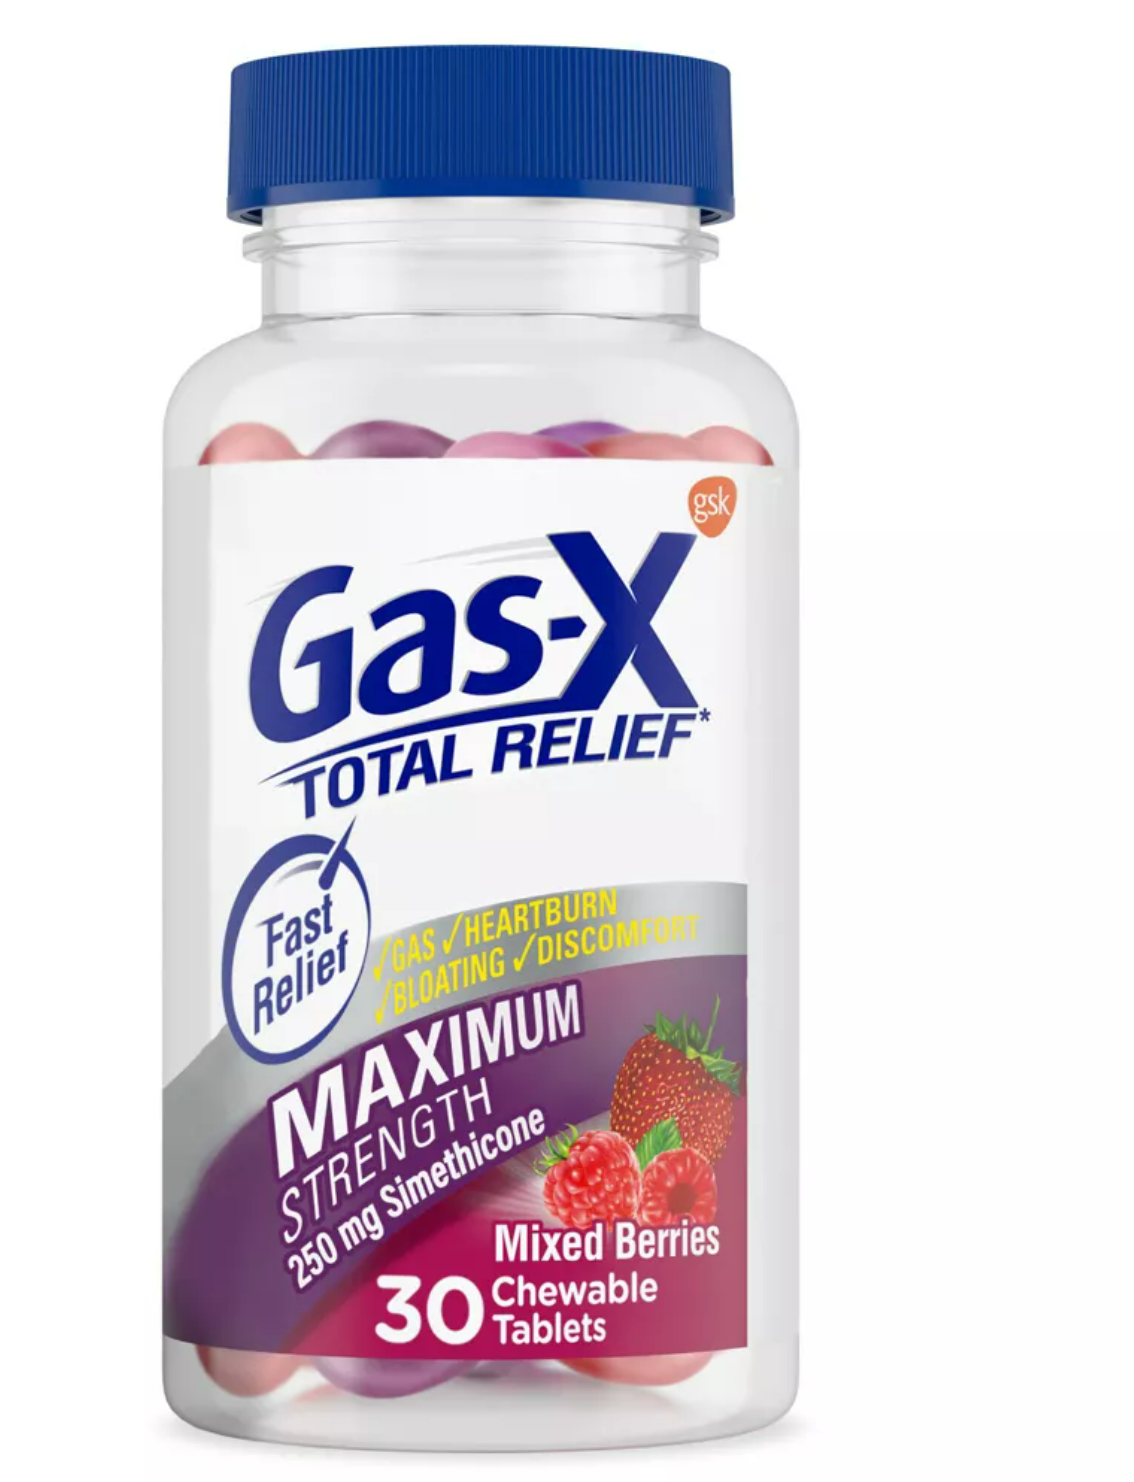 gas x tablets for gas pressure relief.png